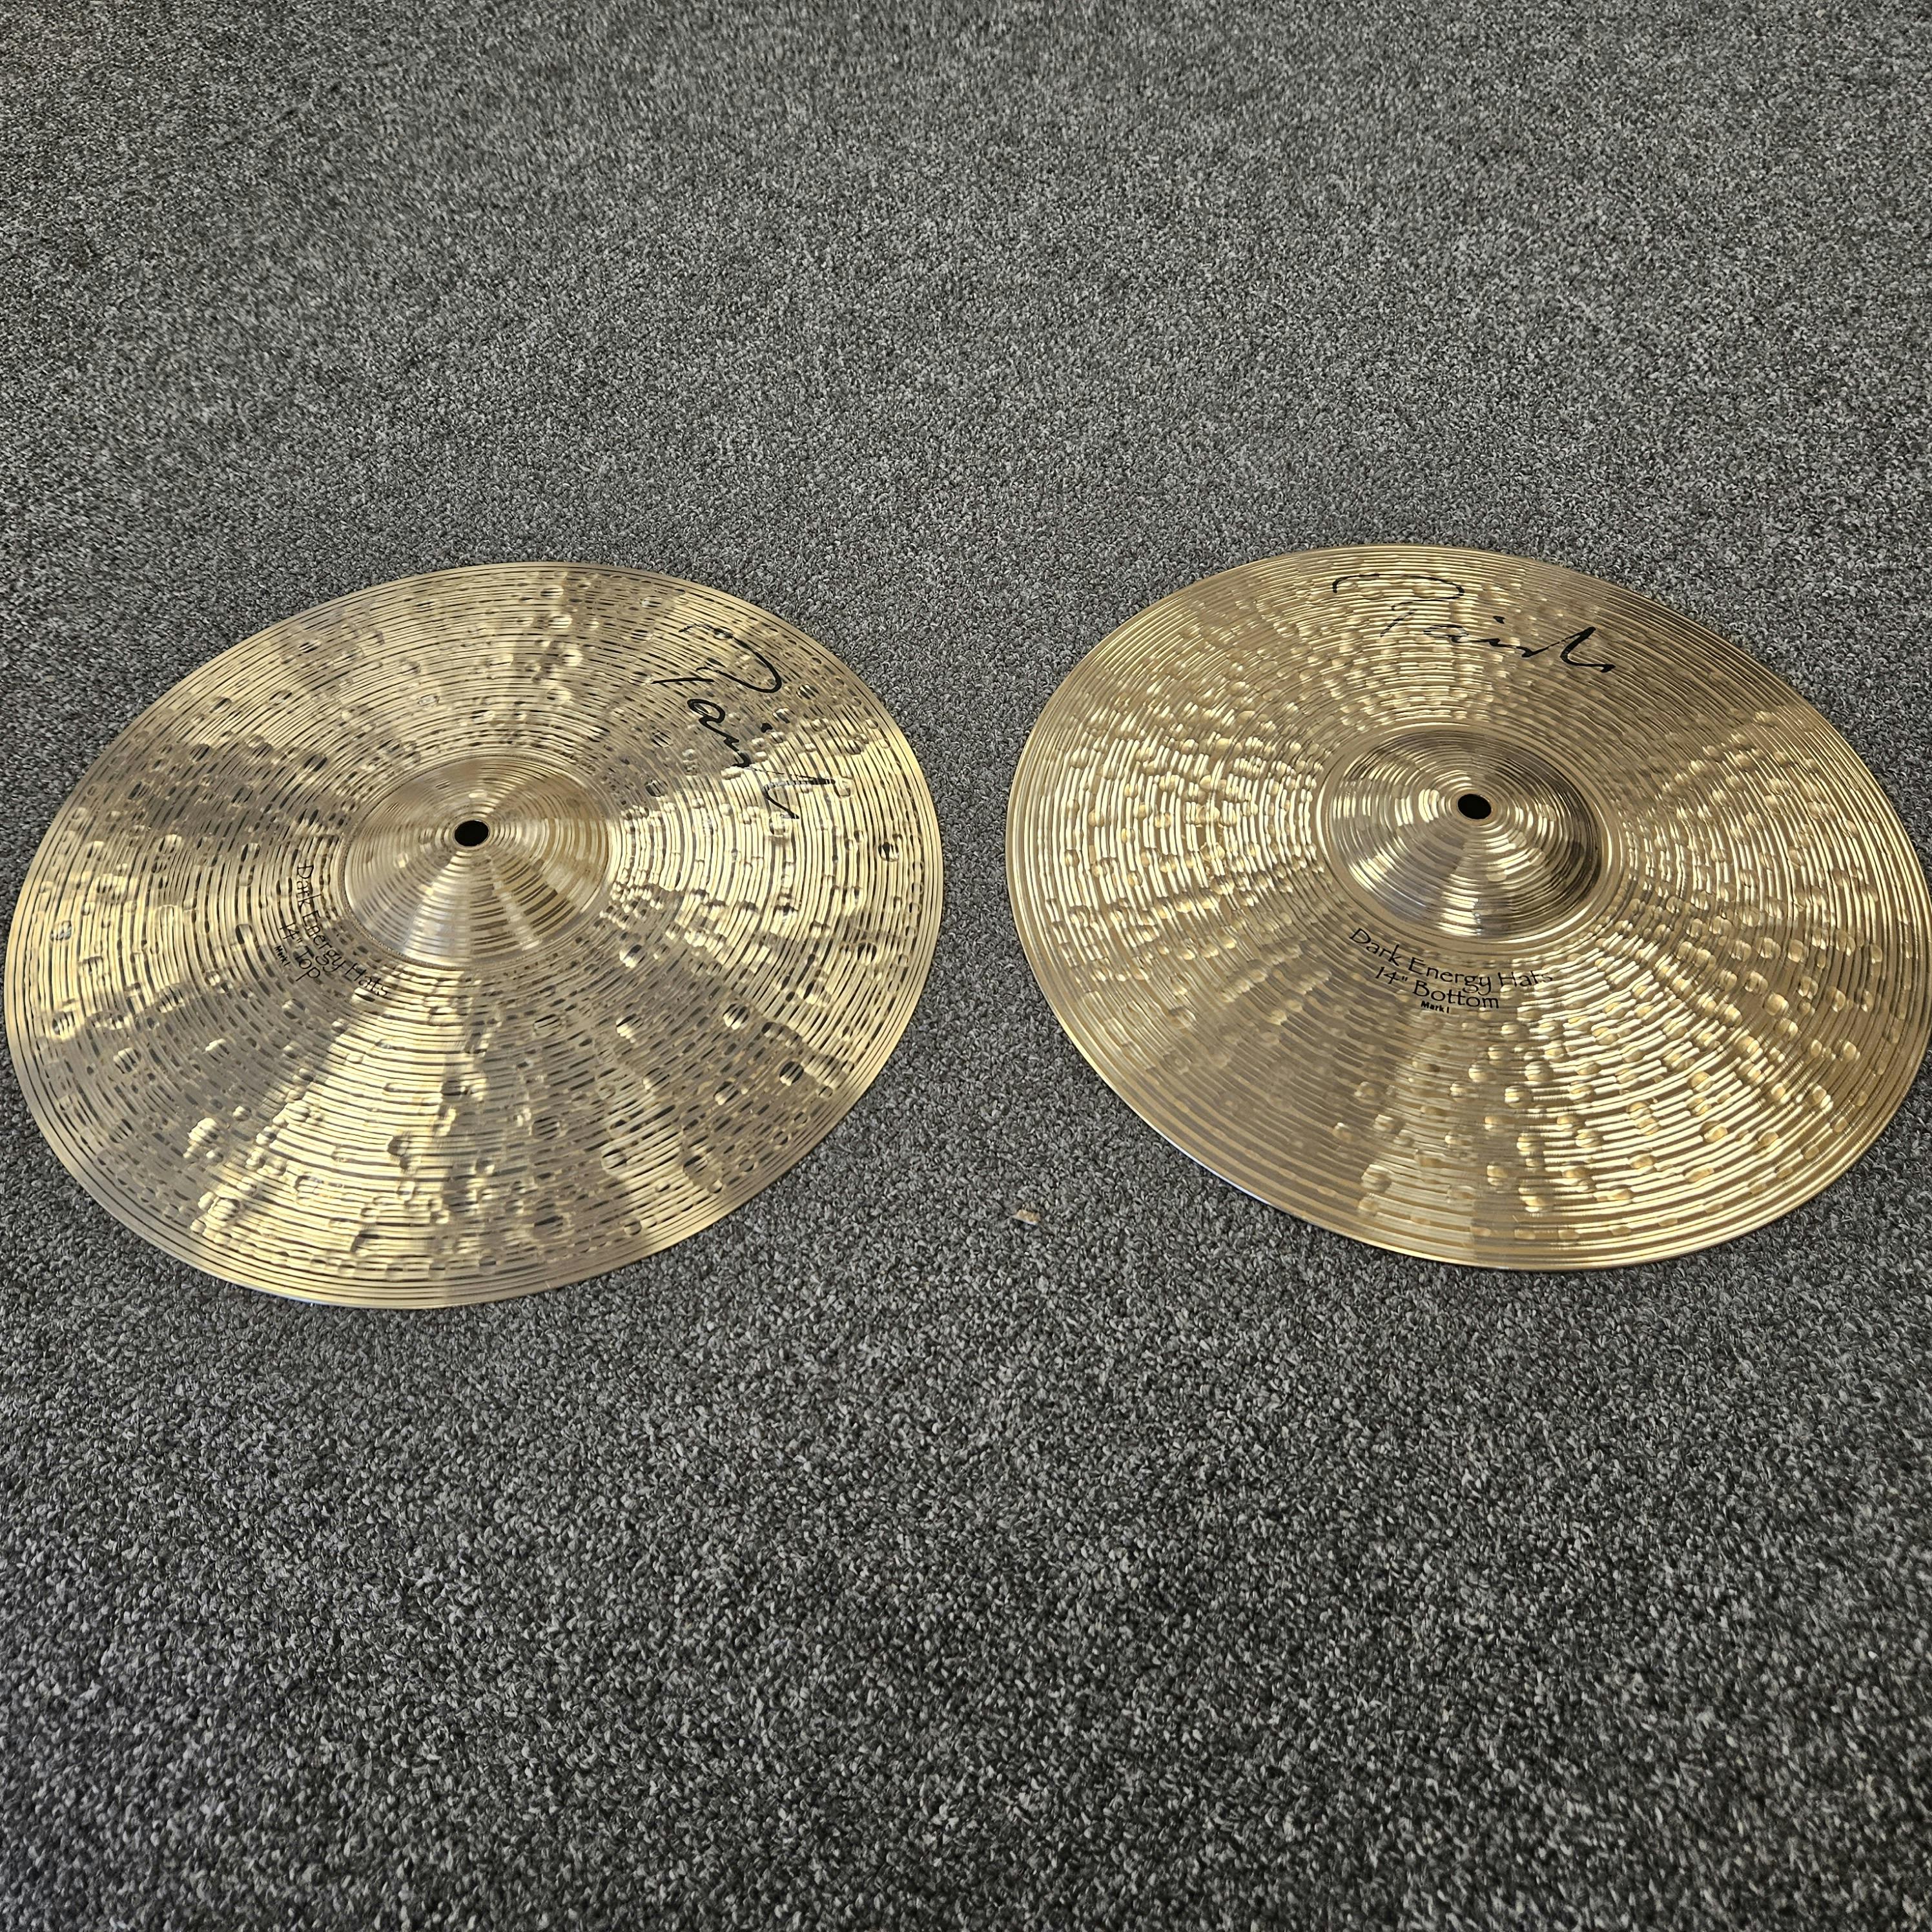 Paiste Signature Series Dark Crisp 14 Inch Top Hi-Hat Cymbal with Tight ＆ Full Chick Sound (4006514) New - 2